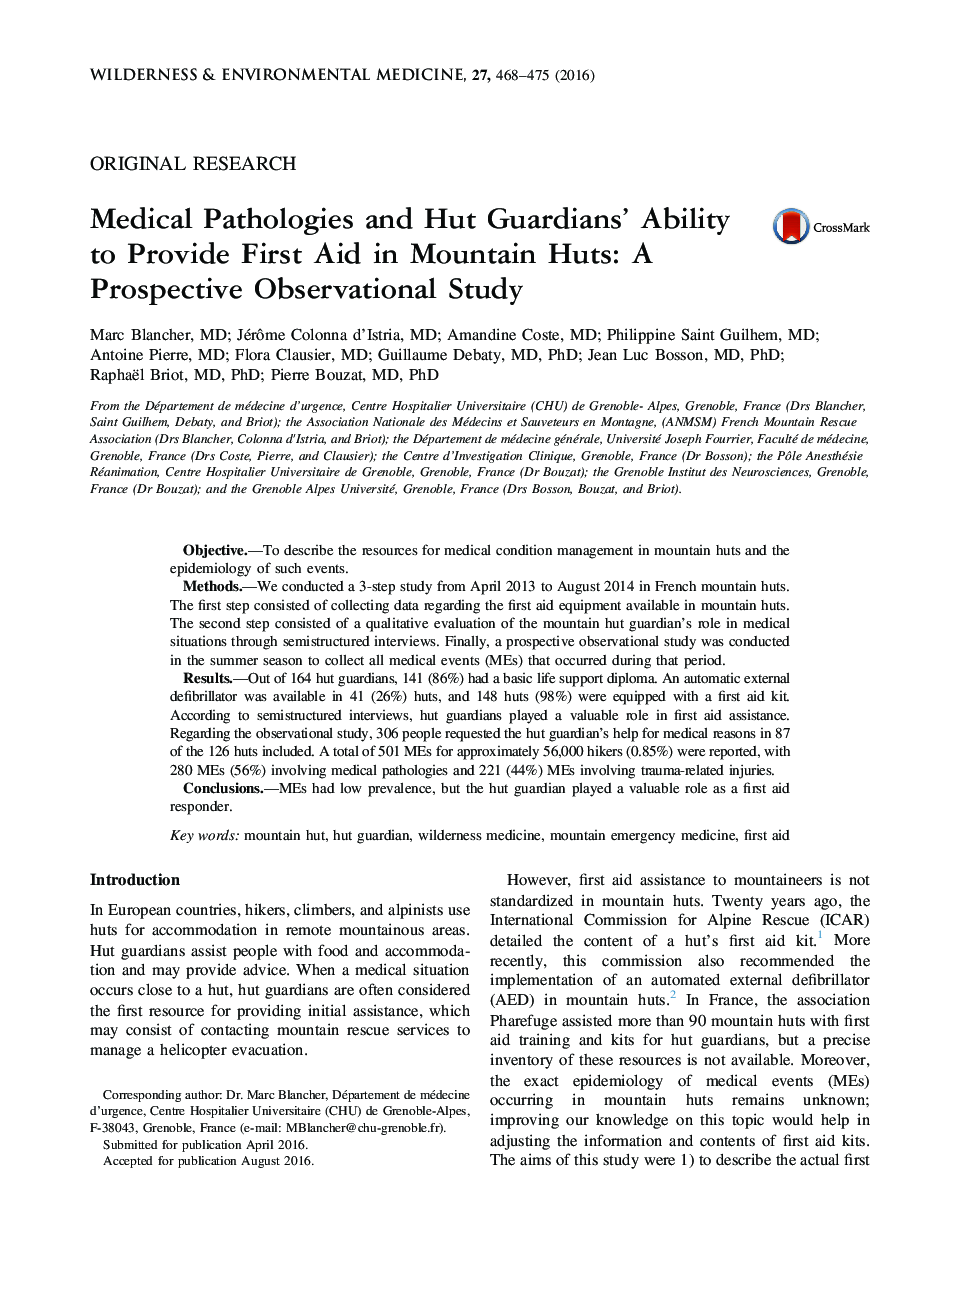 Original ResearchMedical Pathologies and Hut Guardians' Ability to Provide First Aid in Mountain Huts: A Prospective Observational Study